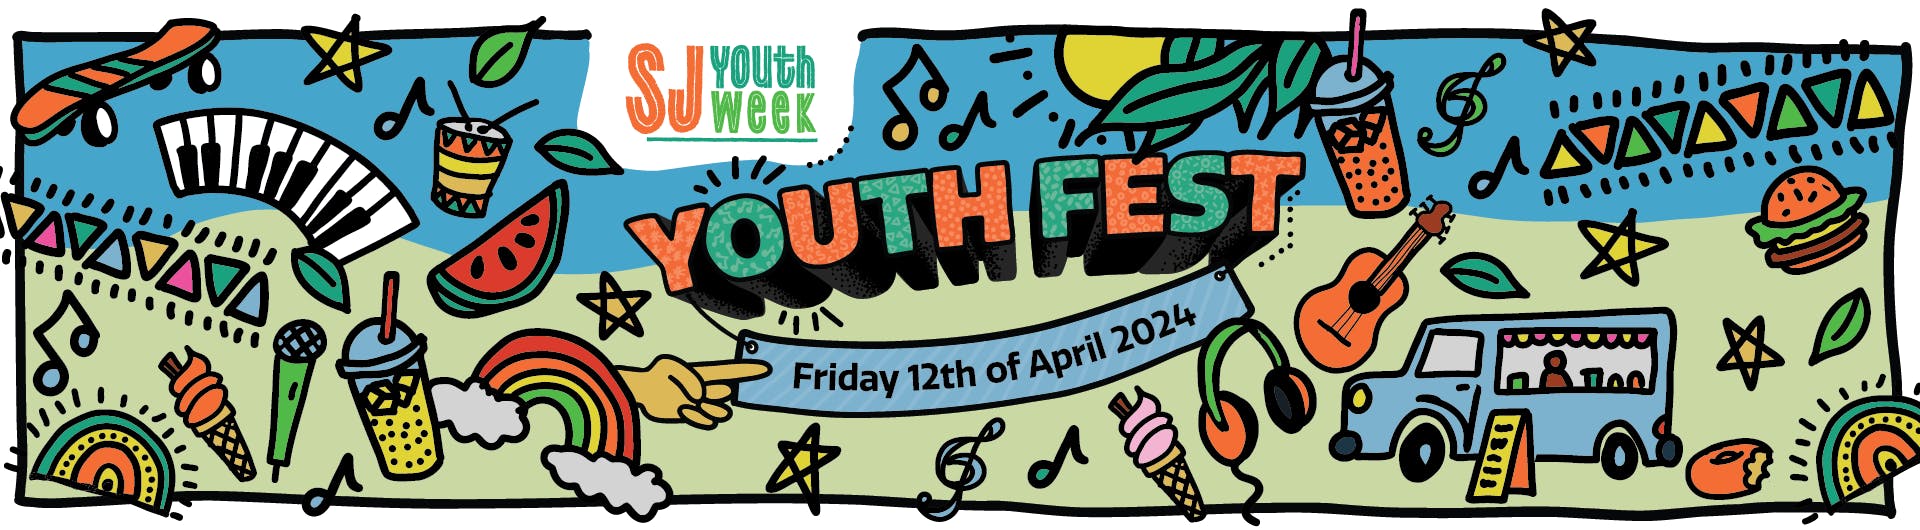 Youth Fest web banner